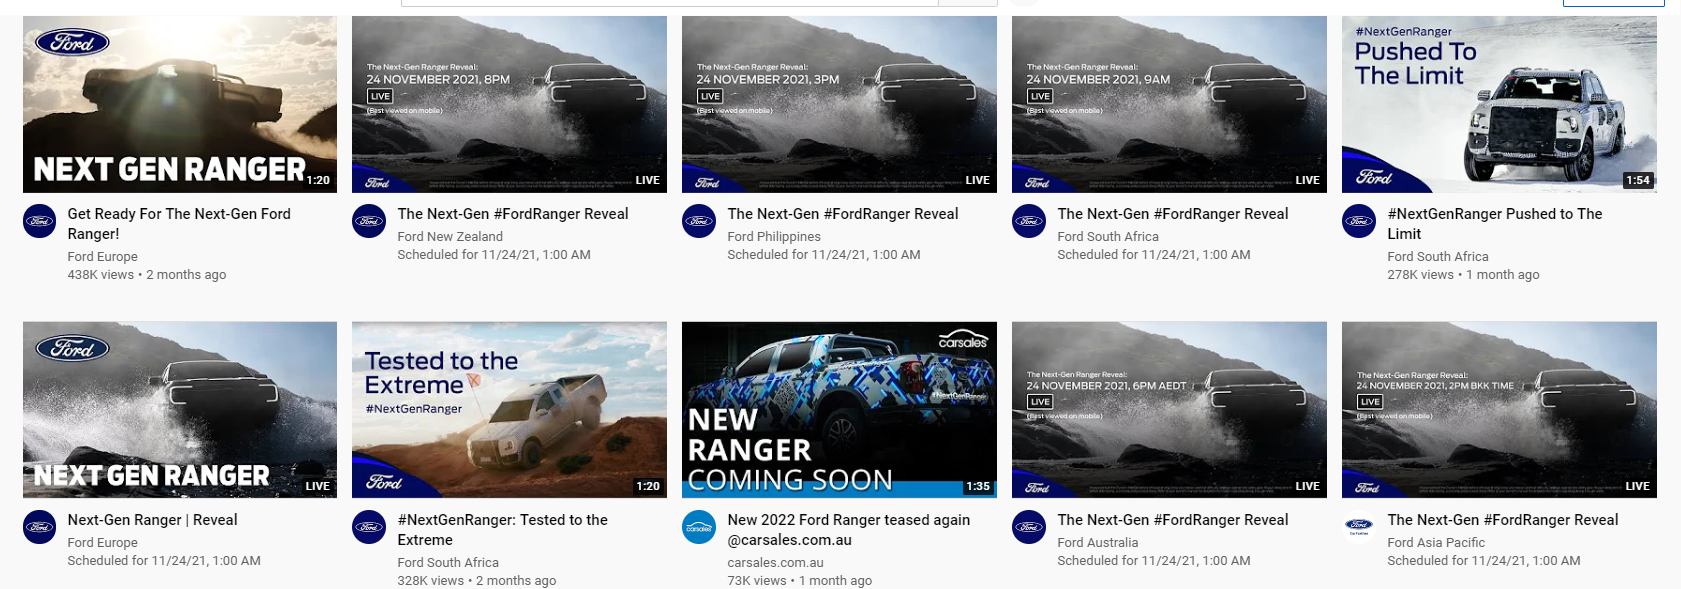 Ford Ranger 2023 Ford Ranger Reveal Coming Nov 24. New Video Feature Released. 1637736705066